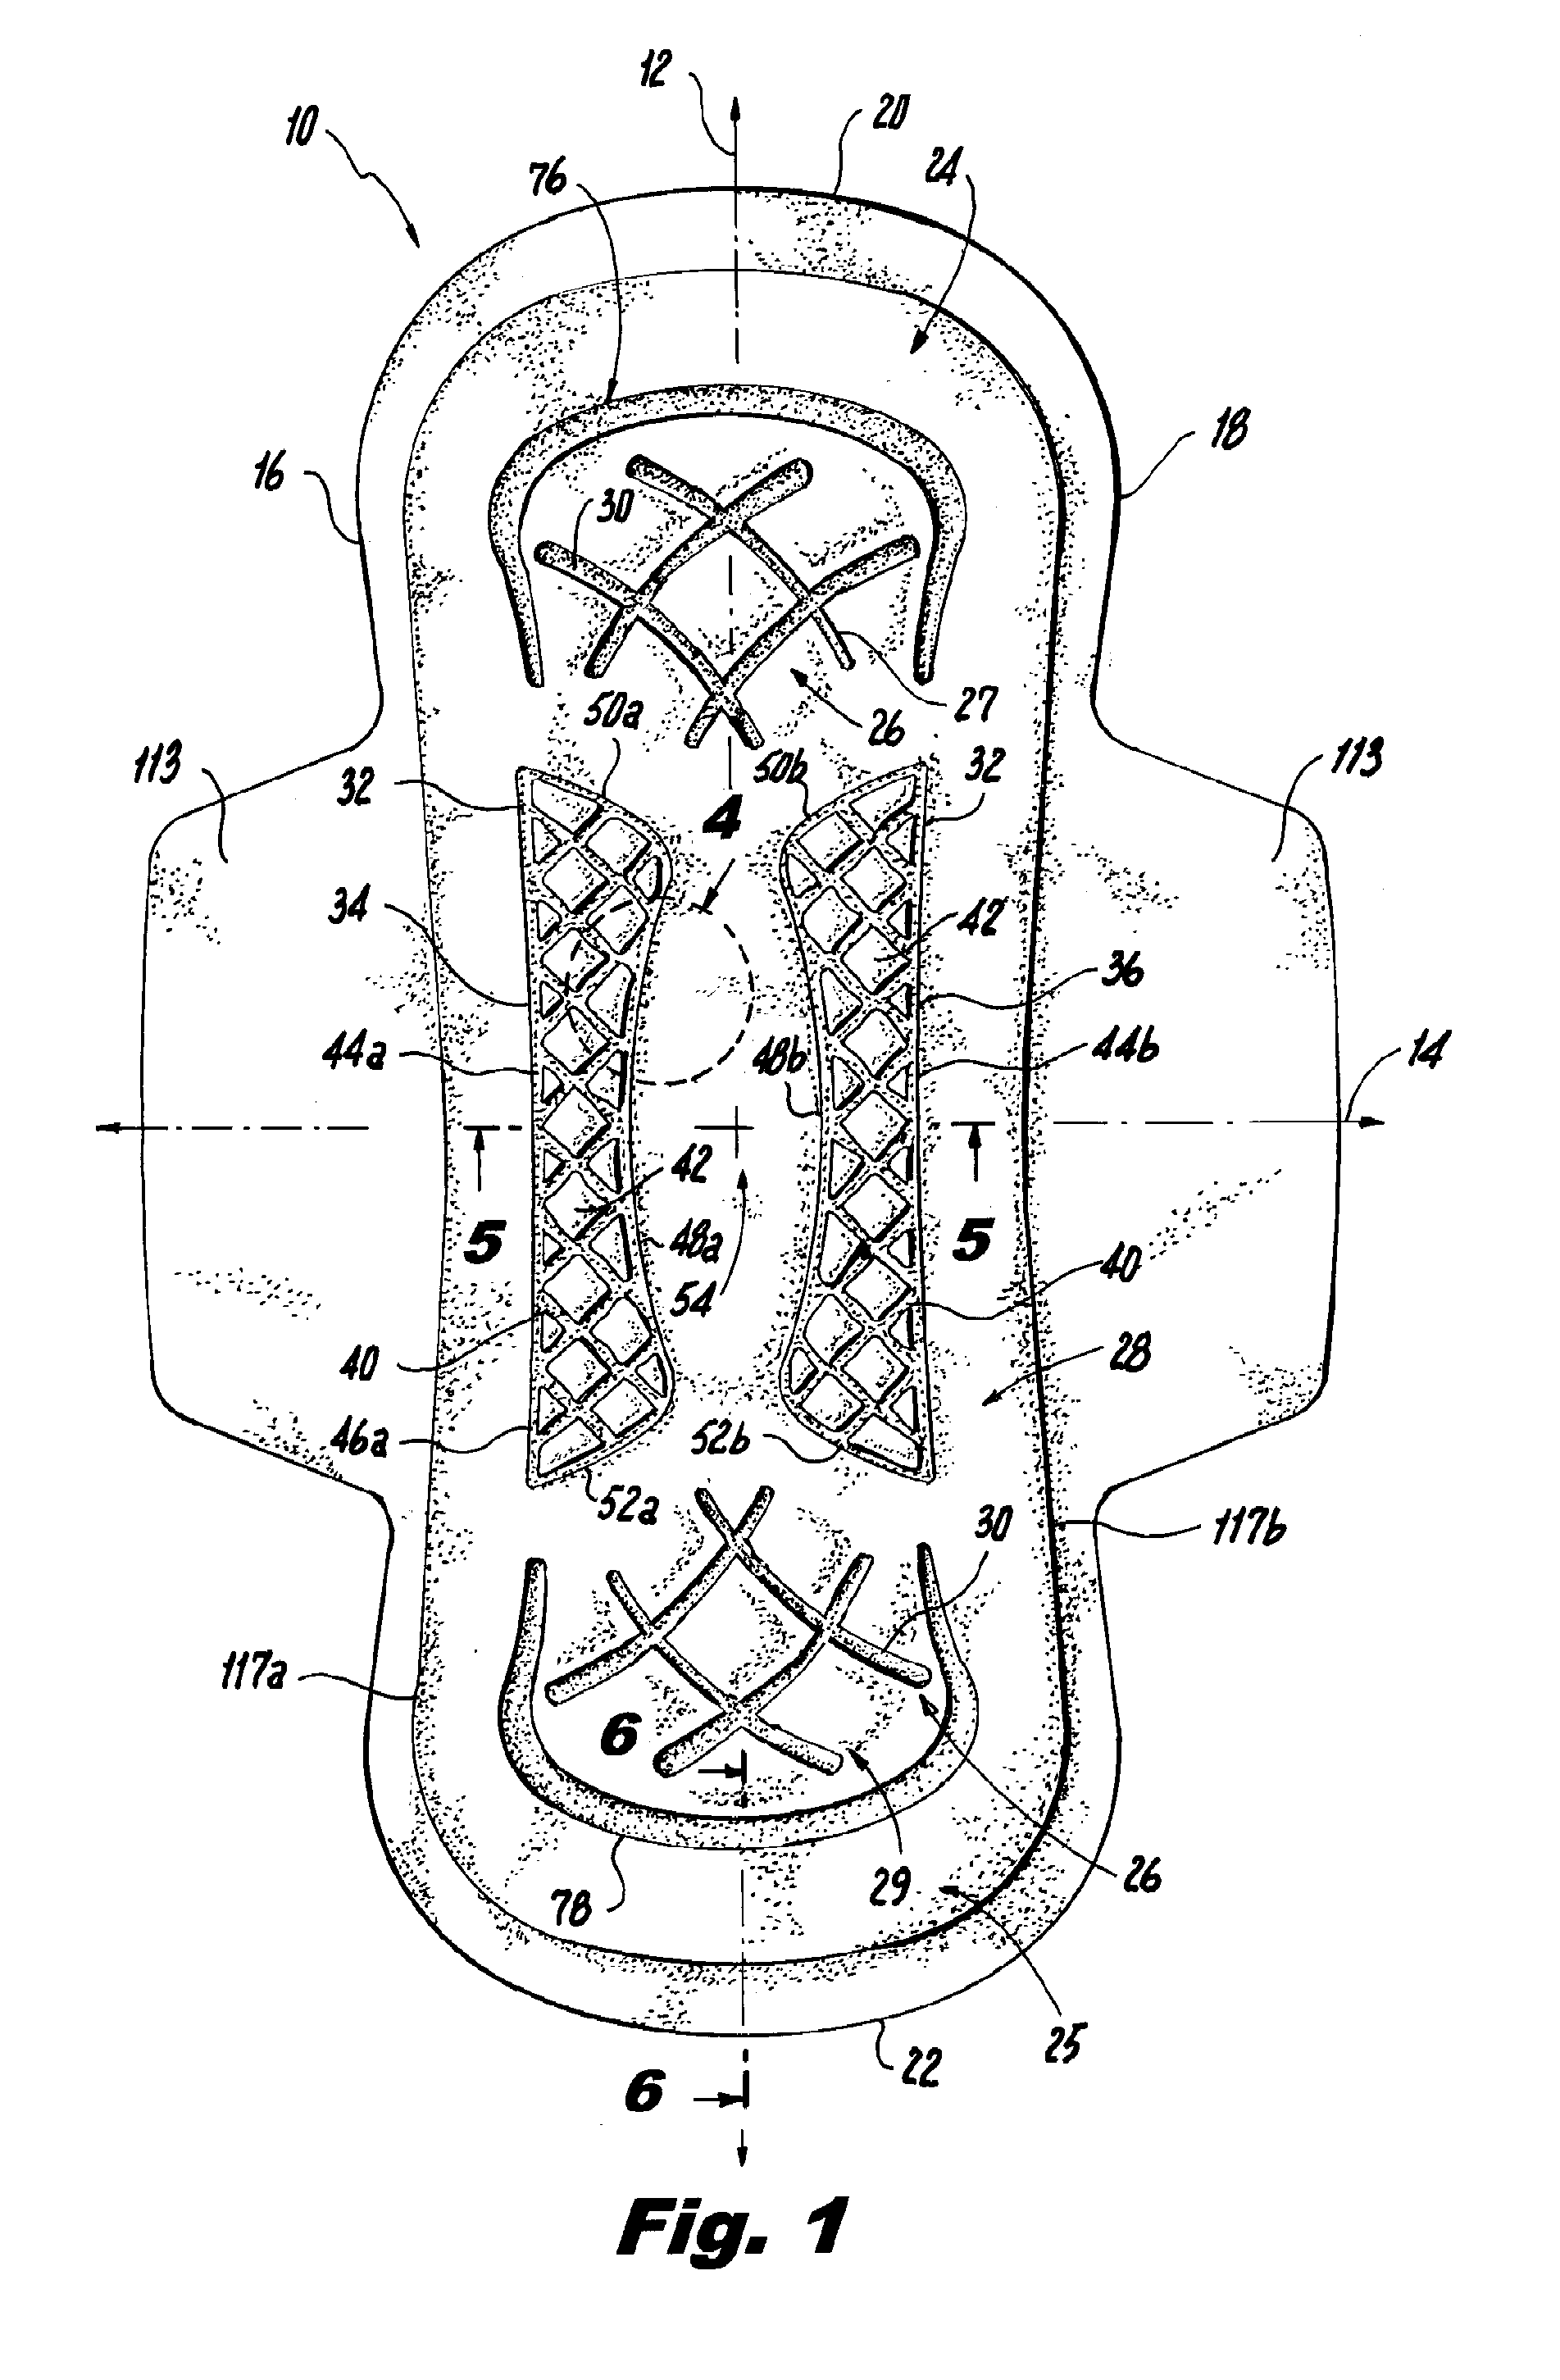 Sanitary napkin including body-facing protrusions for preventing side leakage and obliquely arranged embossed channels